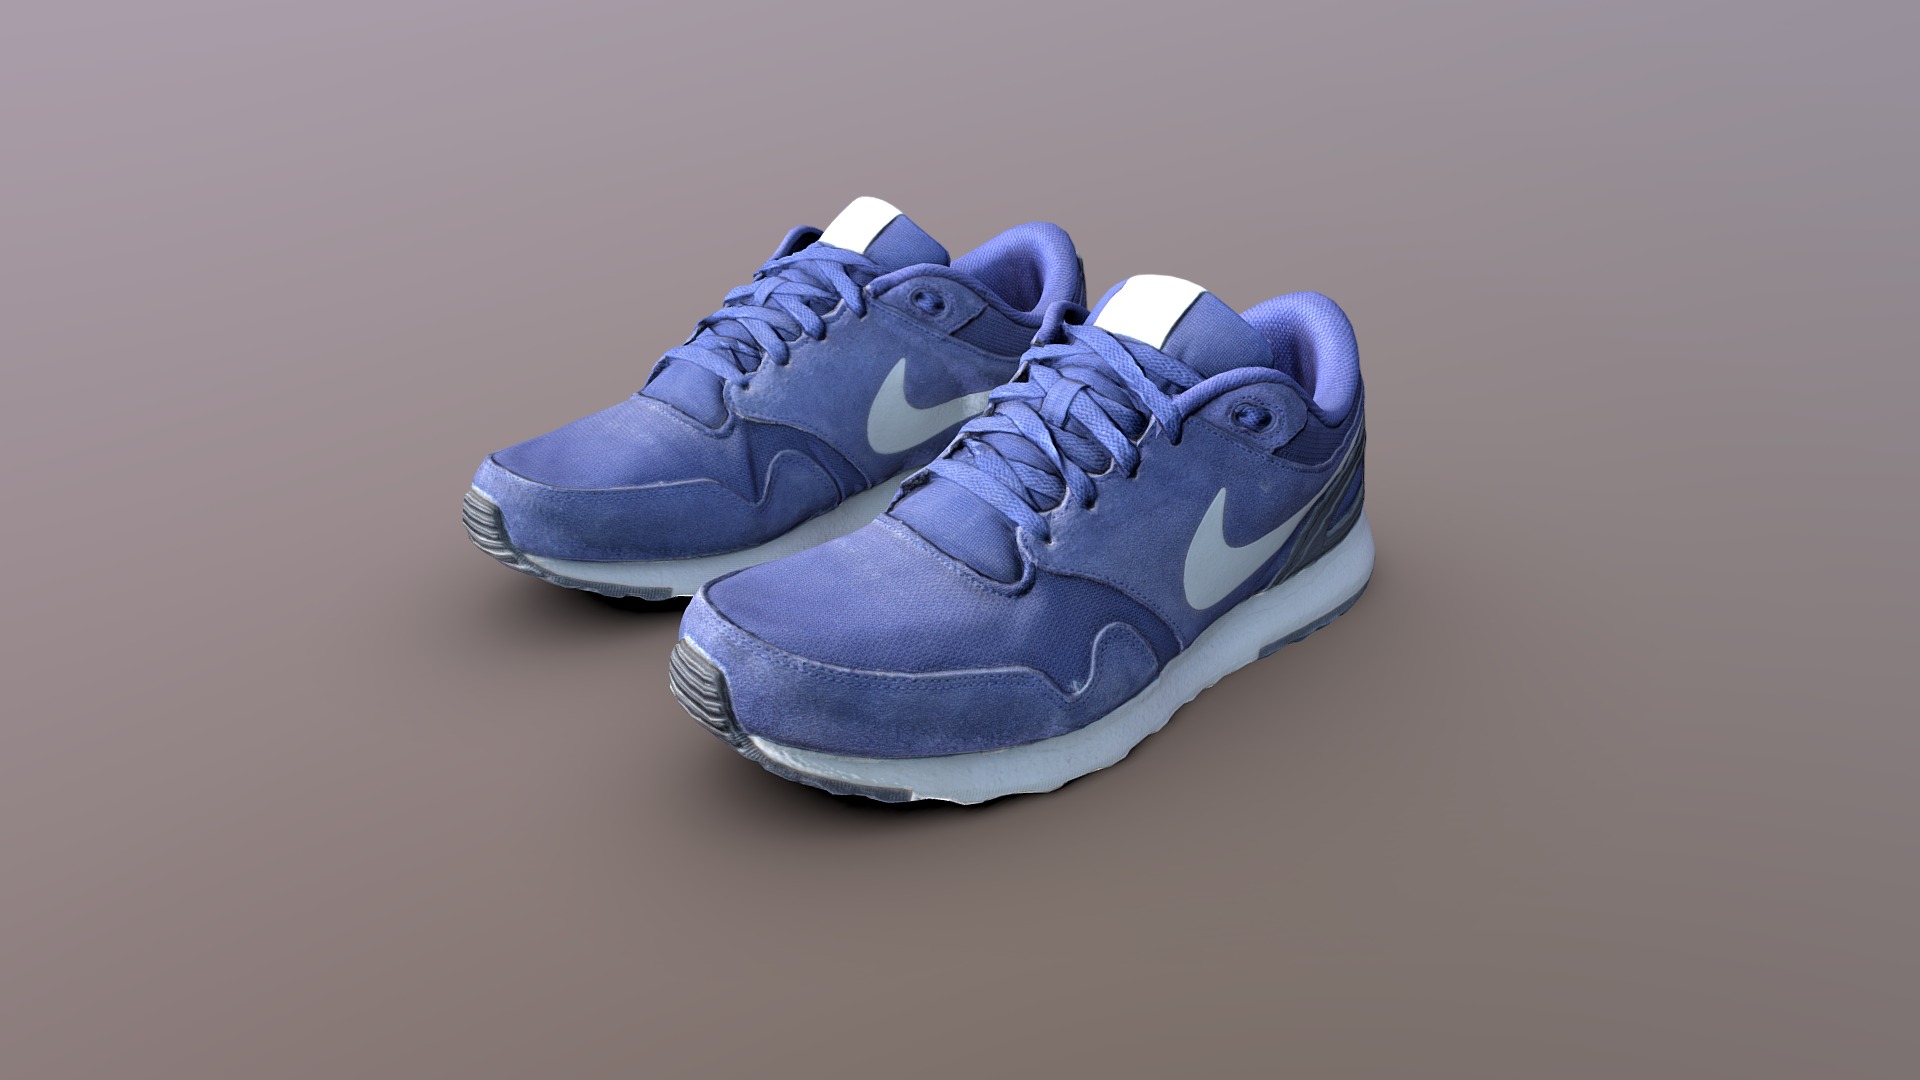 3D model Nike Shoes - This is a 3D model of the Nike Shoes. The 3D model is about a pair of blue shoes.